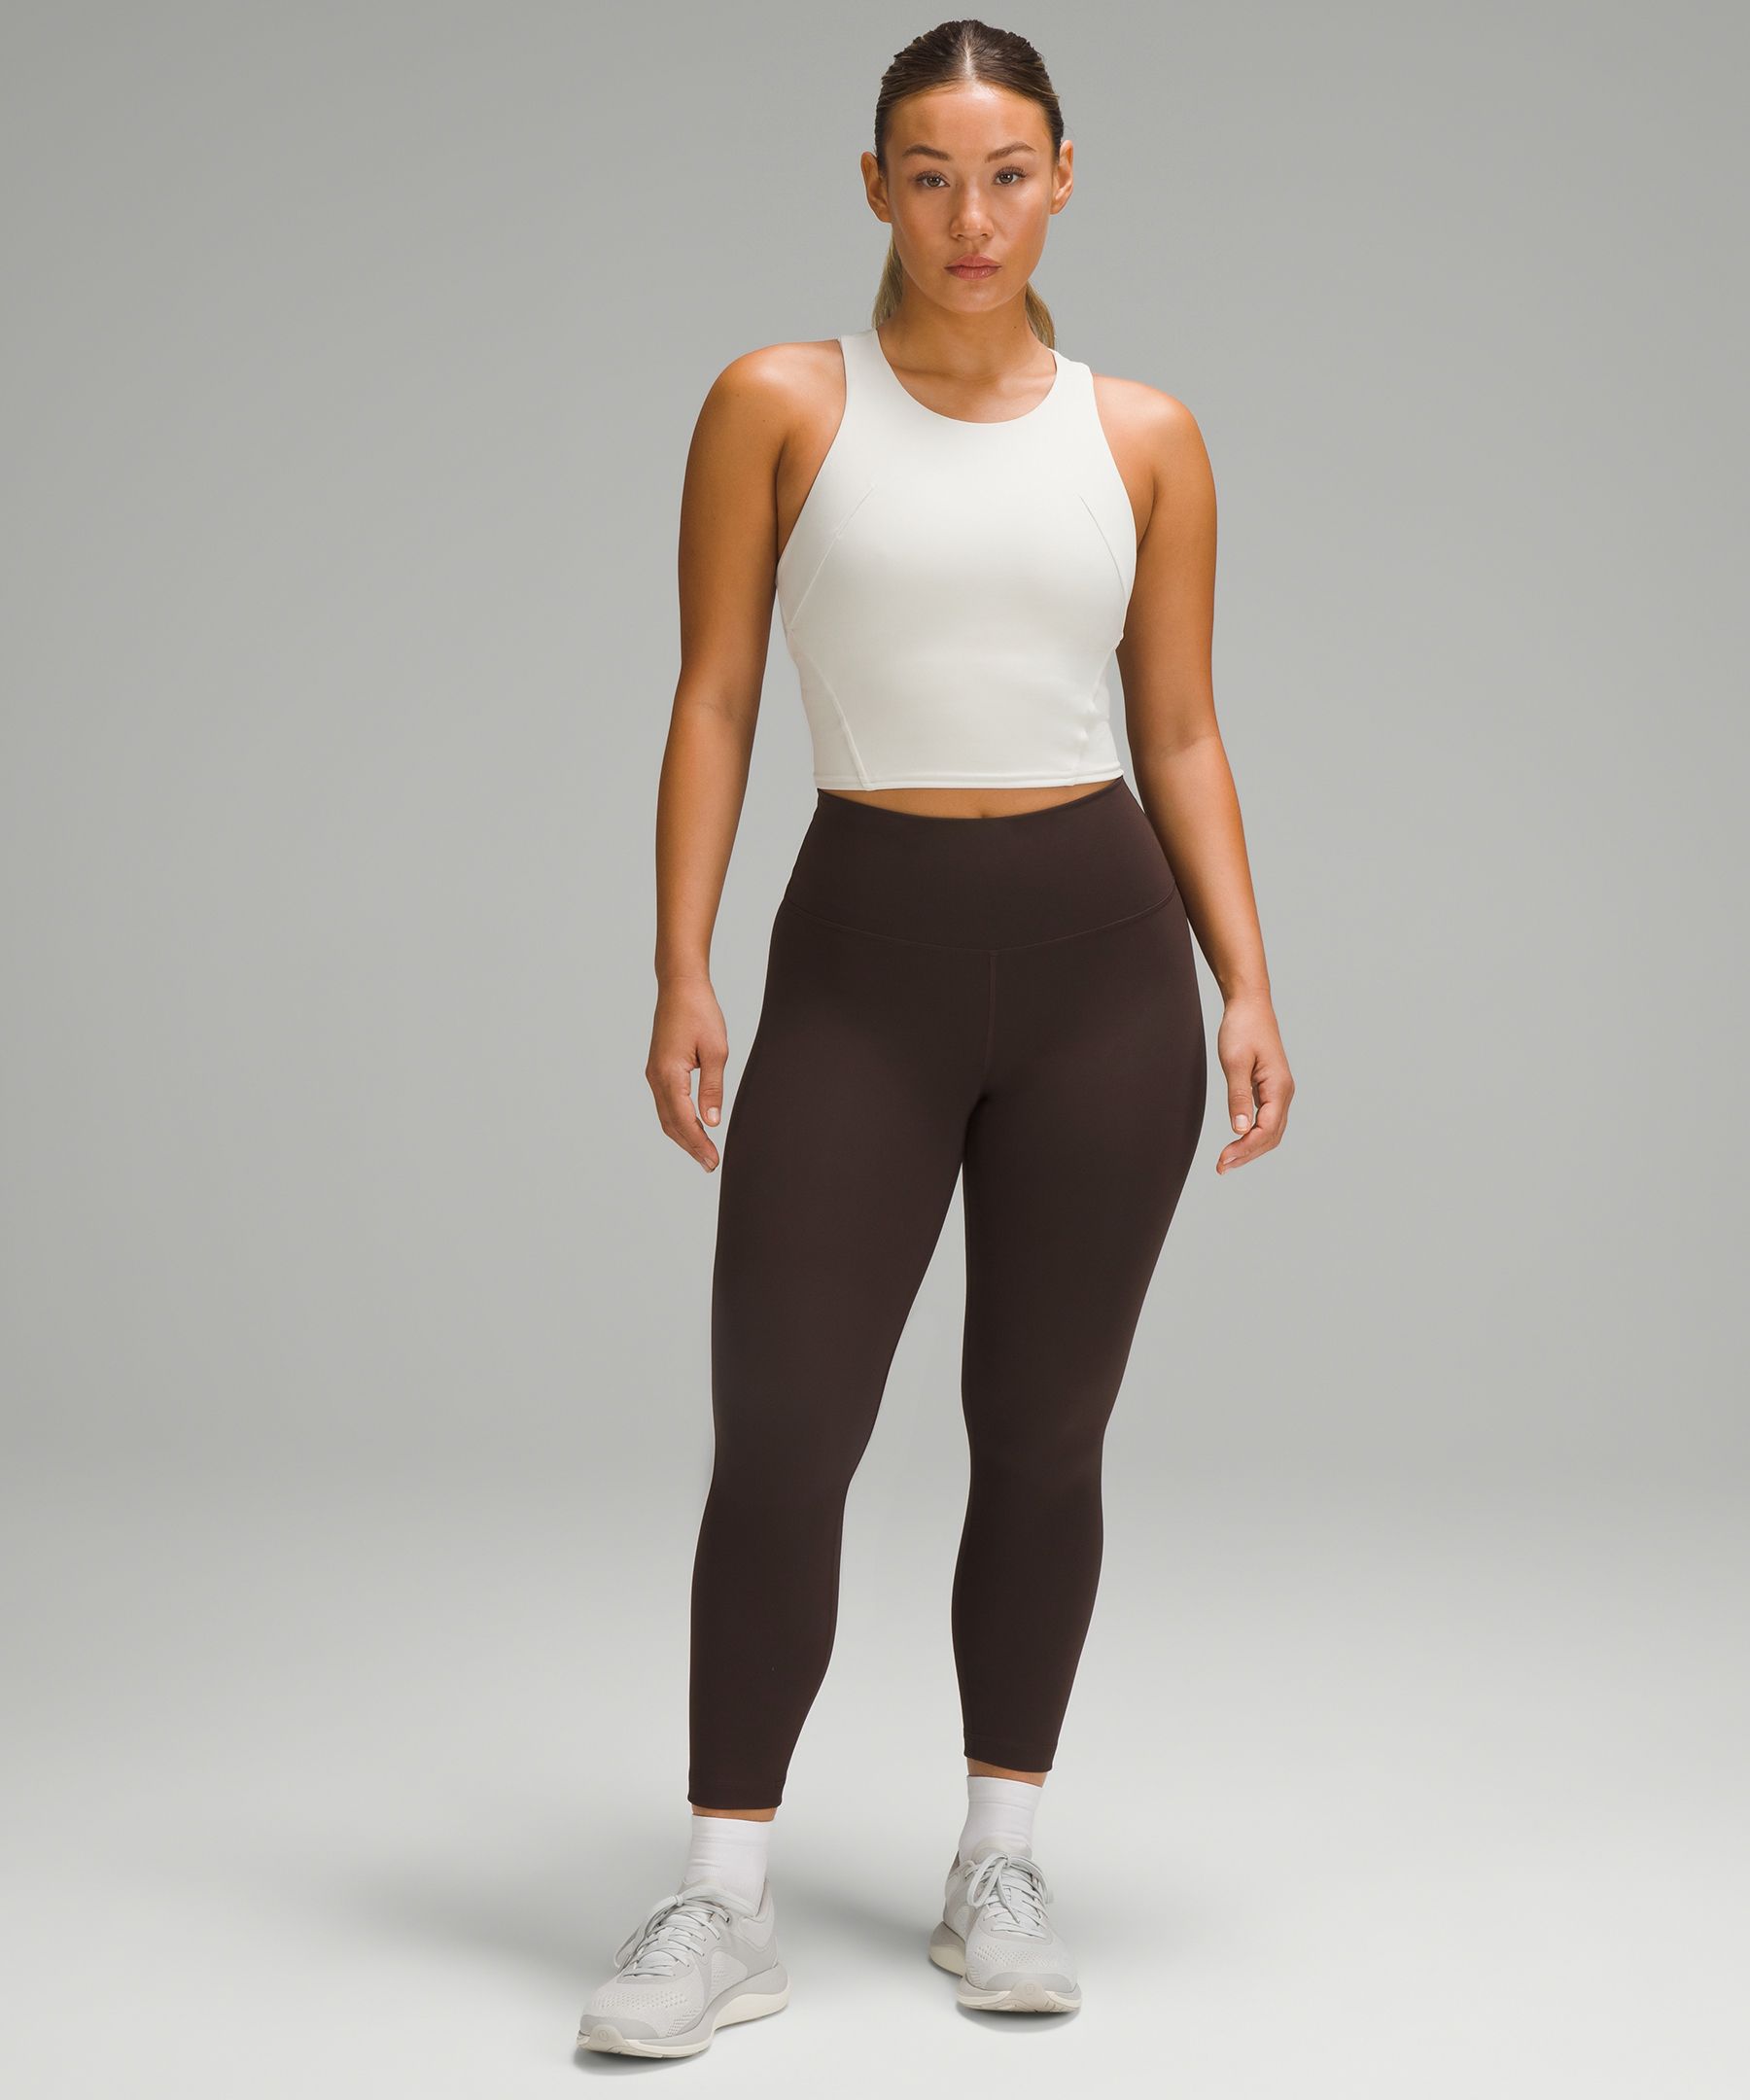 Lululemon Wanderer Crop 23” Tan Size 6 - $85 New With Tags - From caroline